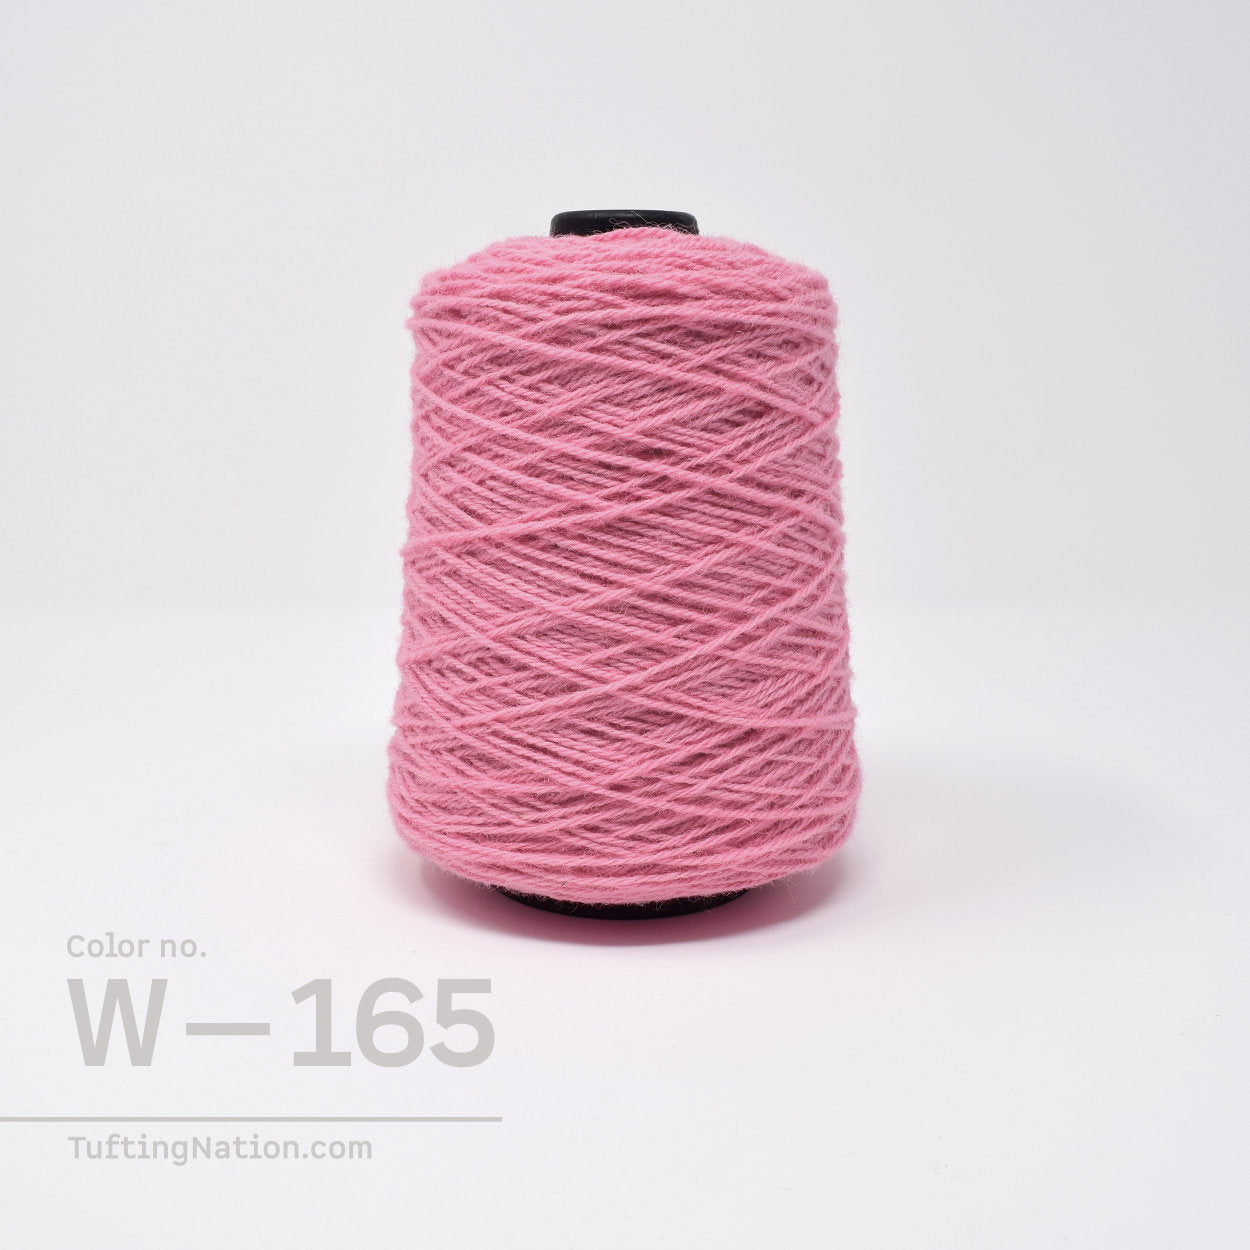 Pink Wool Tufting Yarn on Cones for Rug Tufting and Rug Weaving | TuftingNation